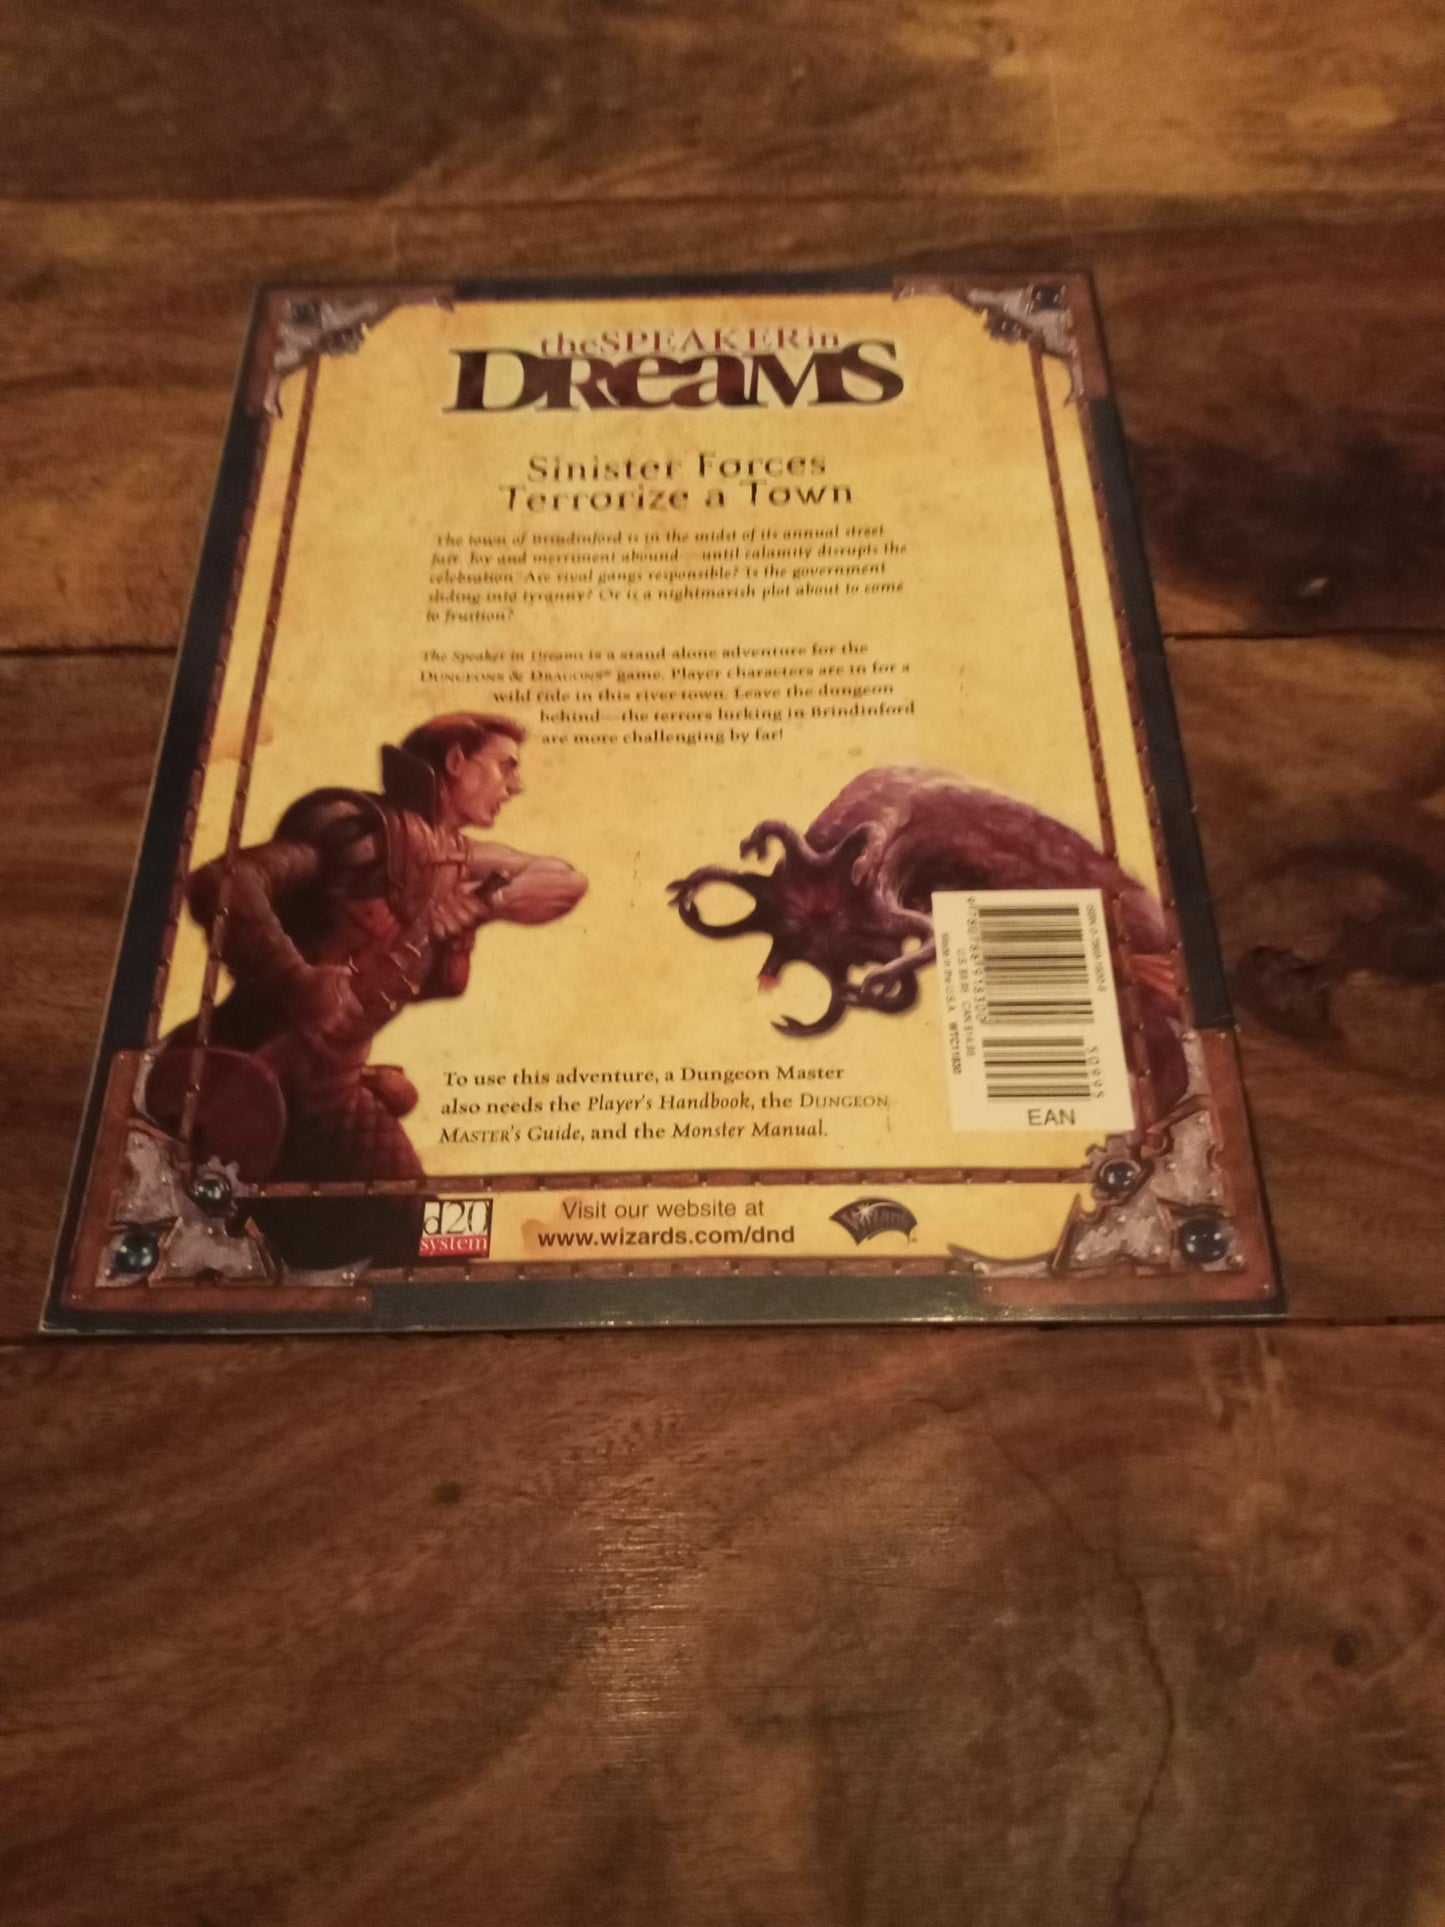 Dungeons & Dragons The Speaker in Dreams Wizards of the Coast 2001